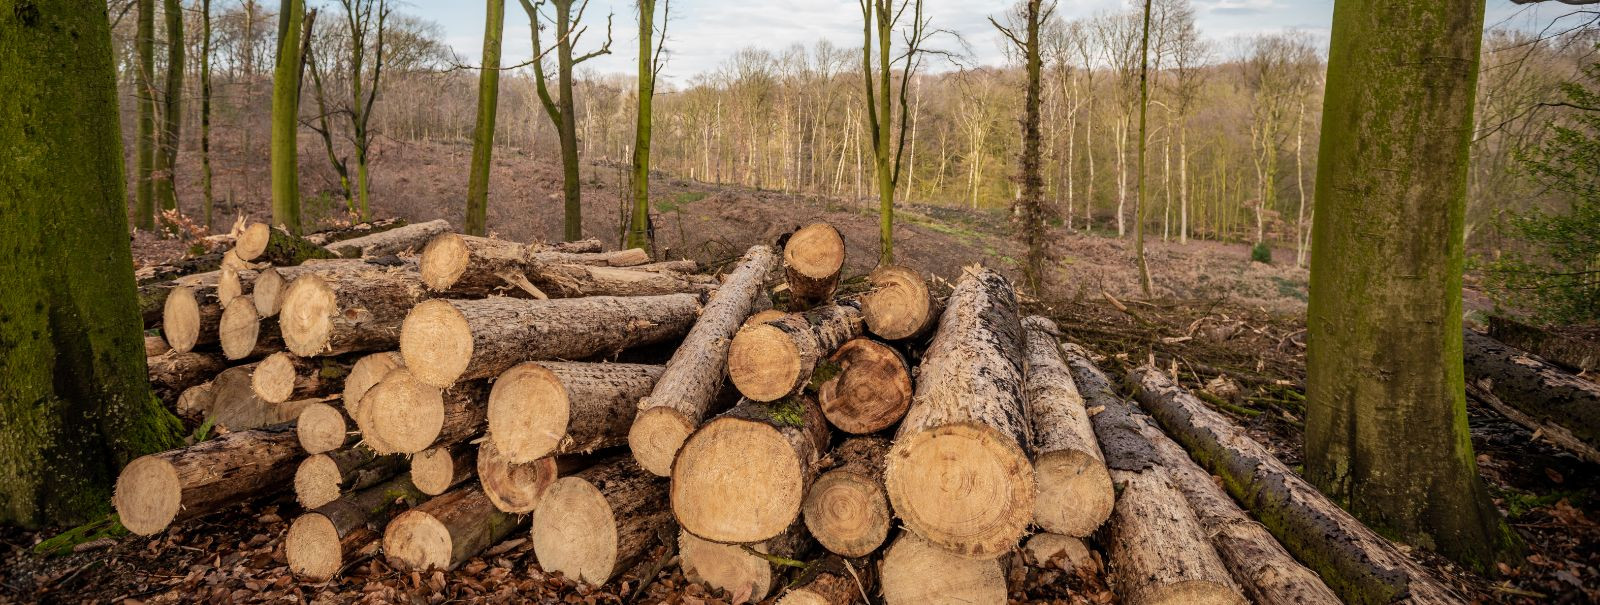 Sustainable forestry is a management philosophy that balances the economic, social, and environmental needs of present and future generations. It is the practic